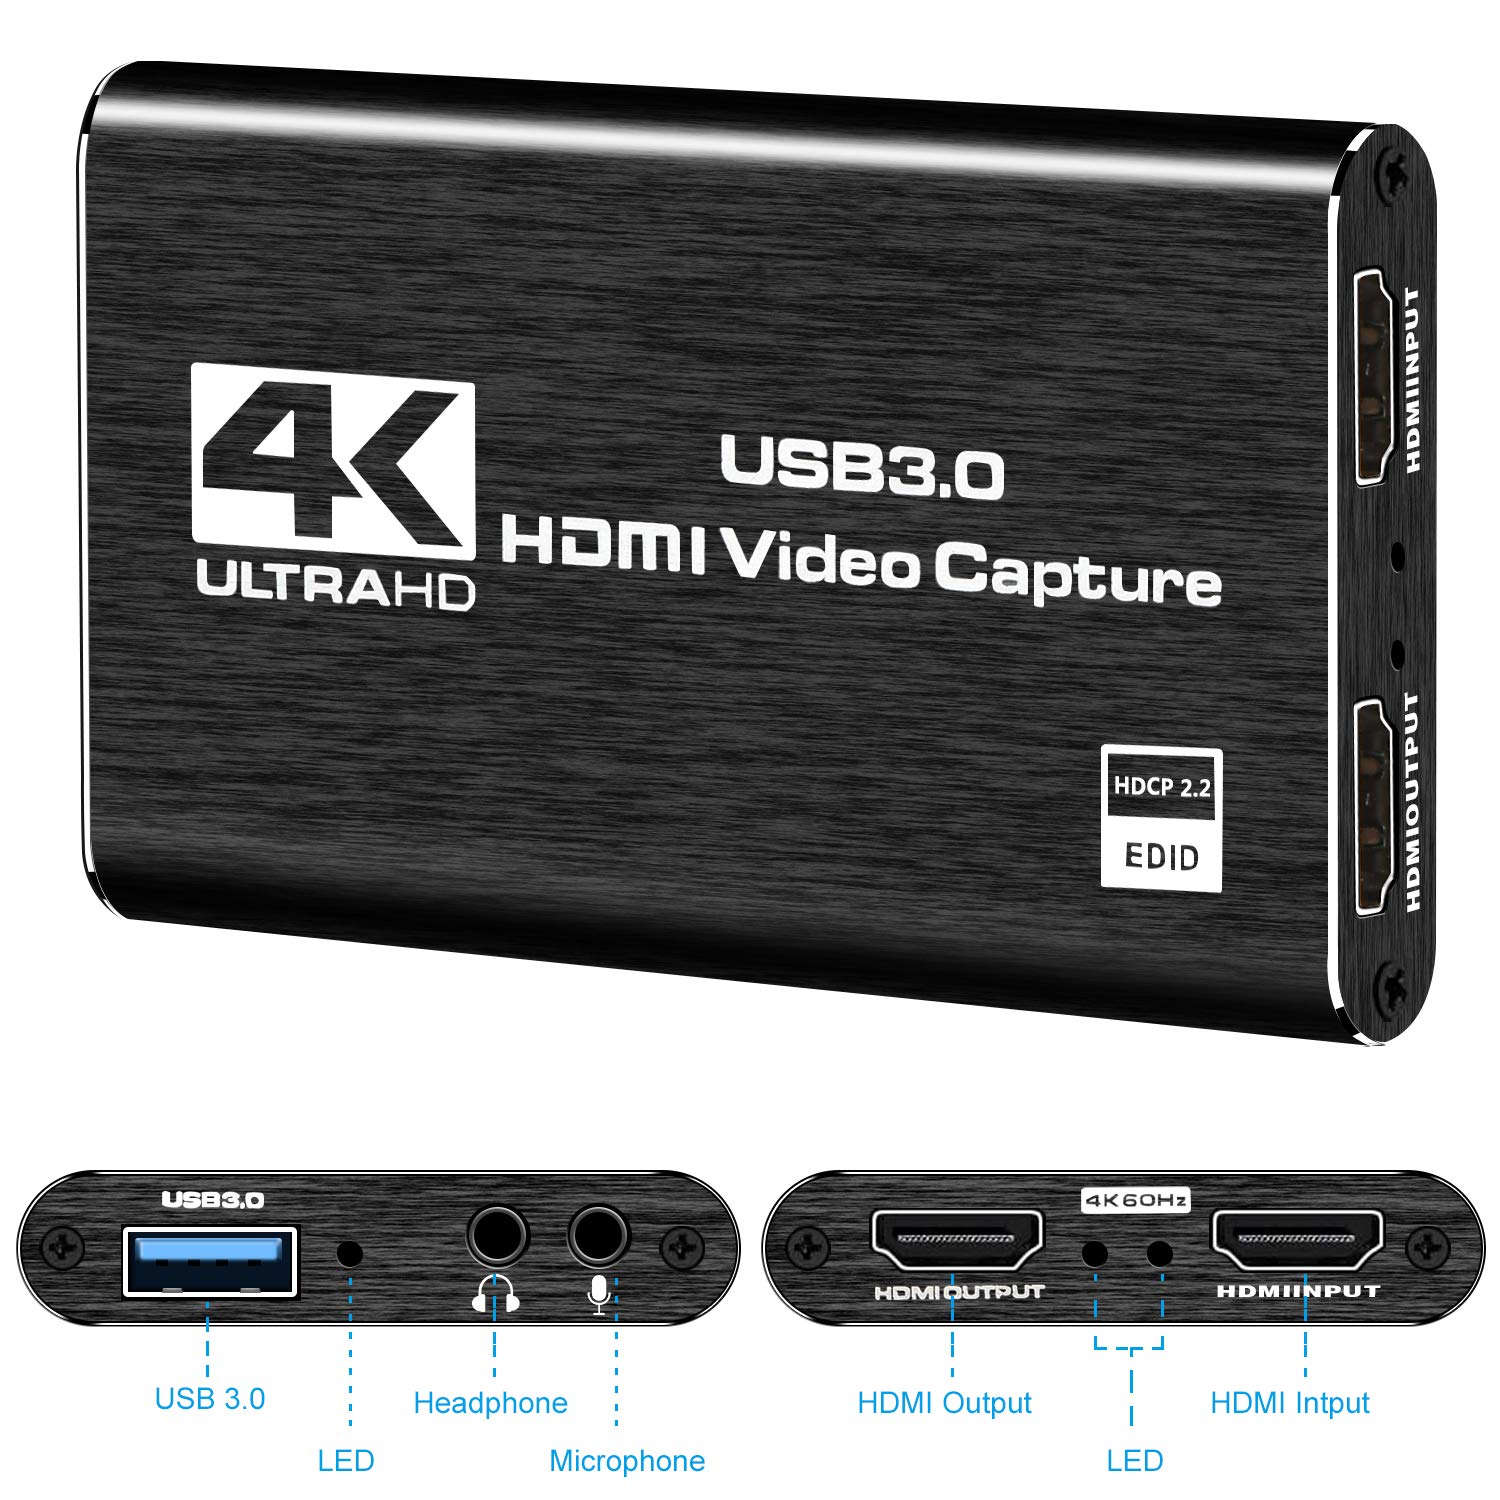 4K HDMI Video Capture Card USB 3.0 REVIEW 